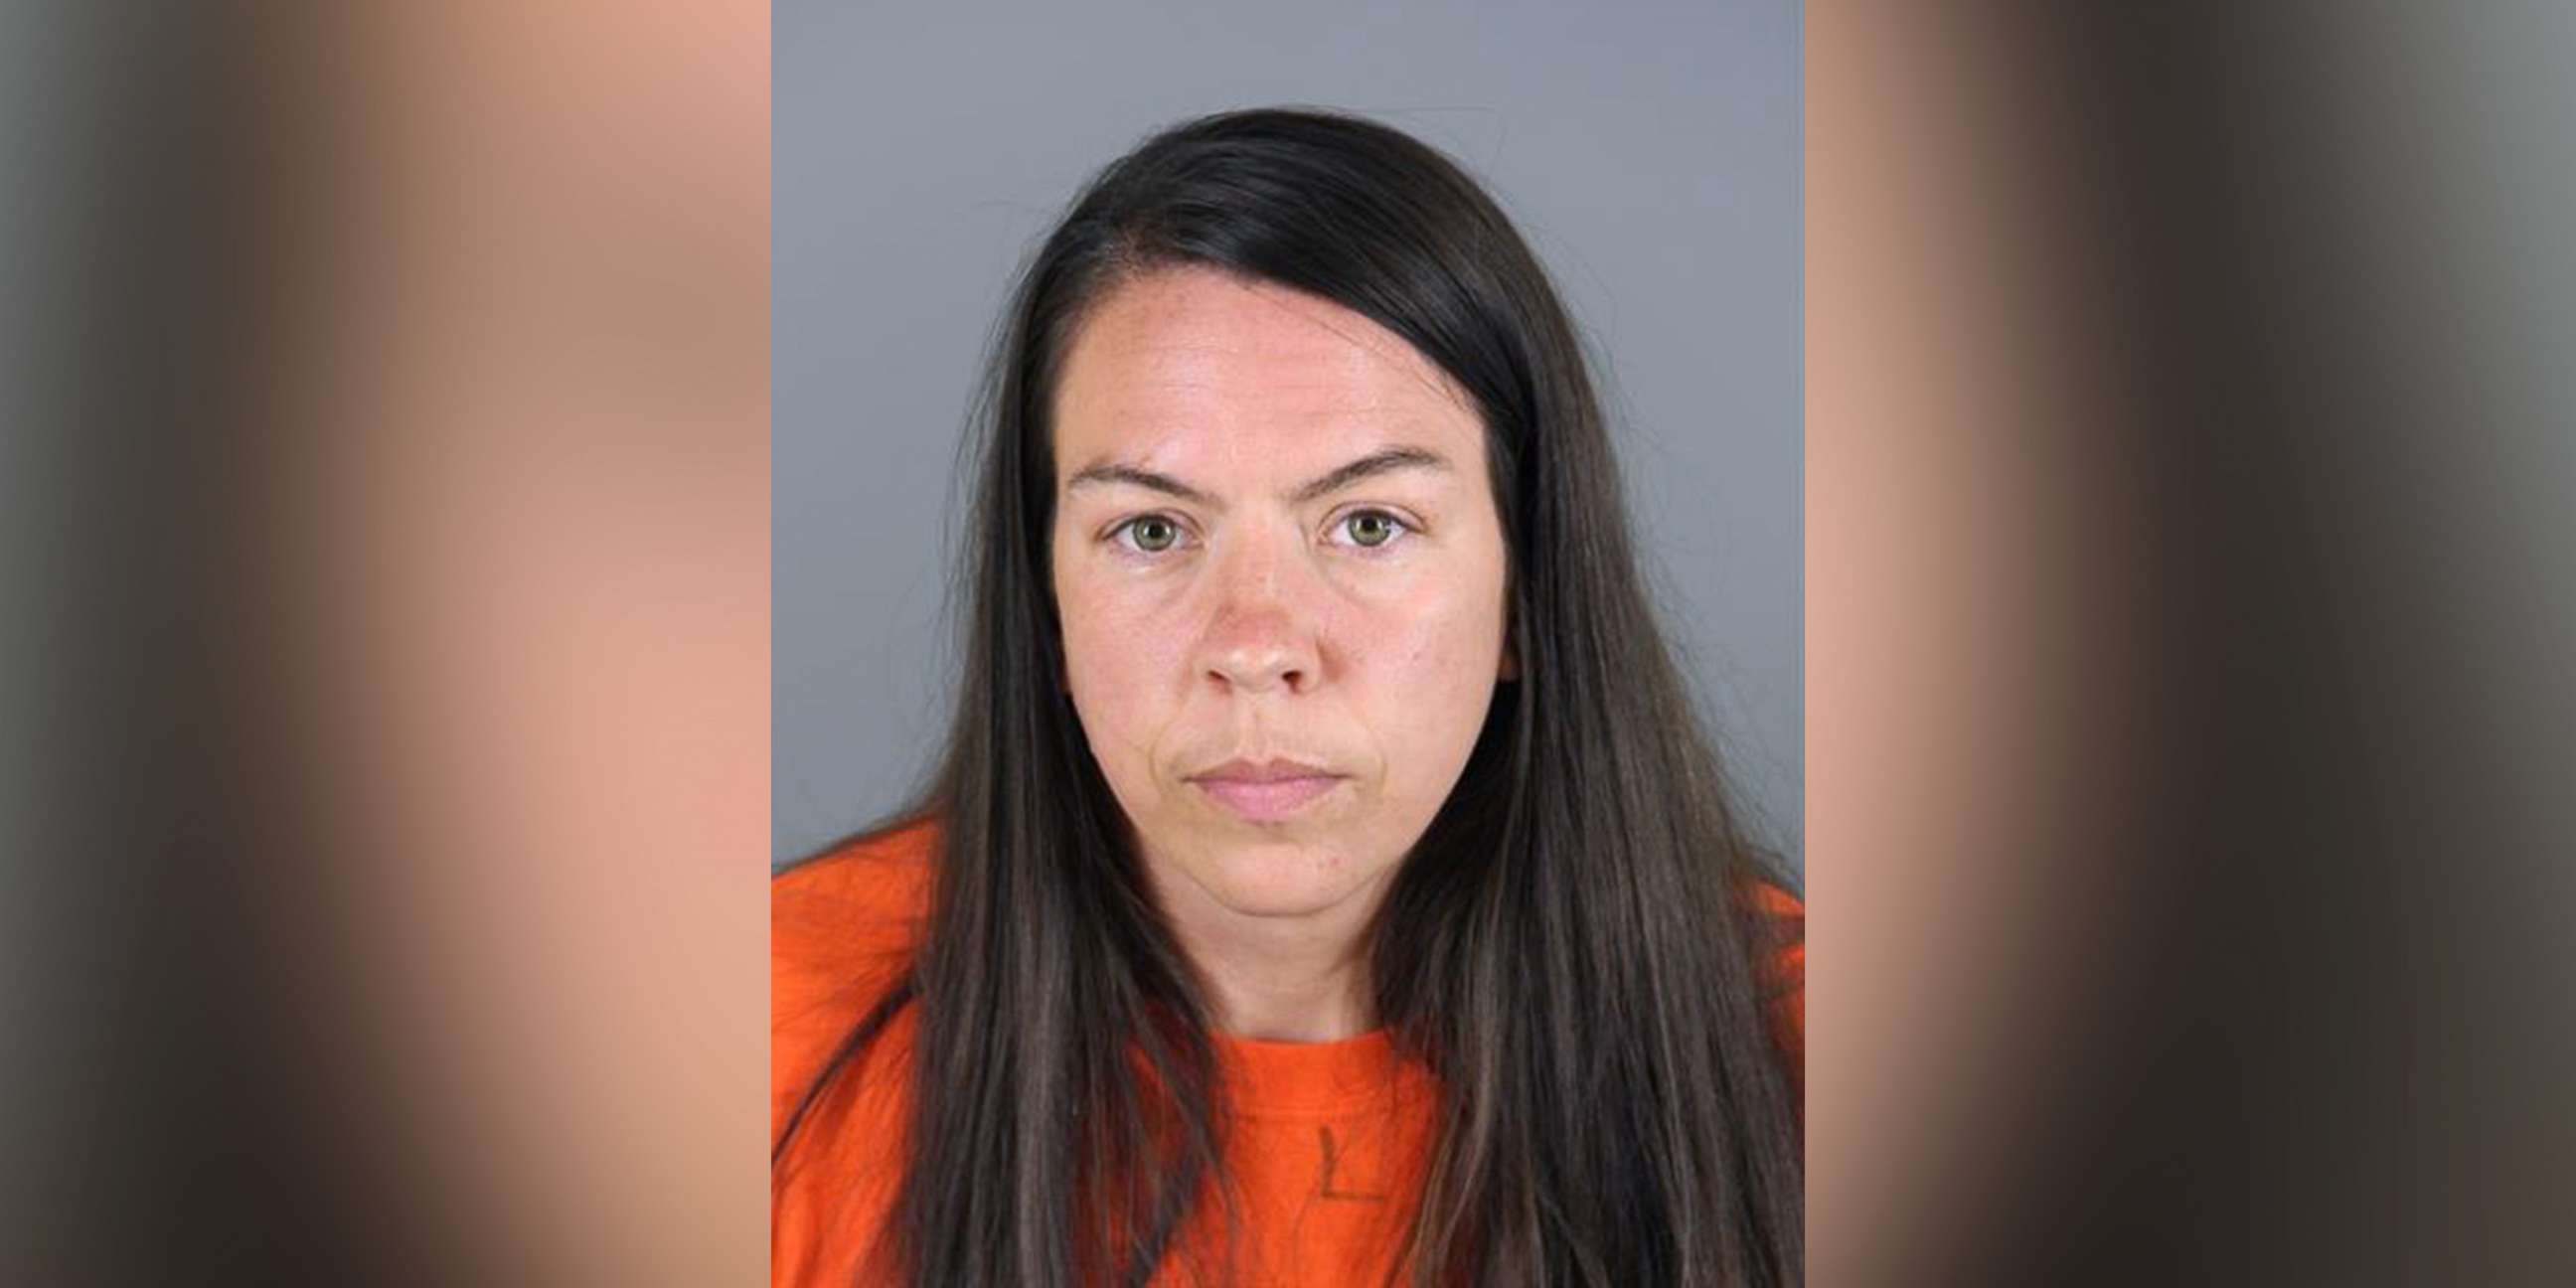 Wisconsin woman arrested, accused of murdering friend with eye drops pic pic pic